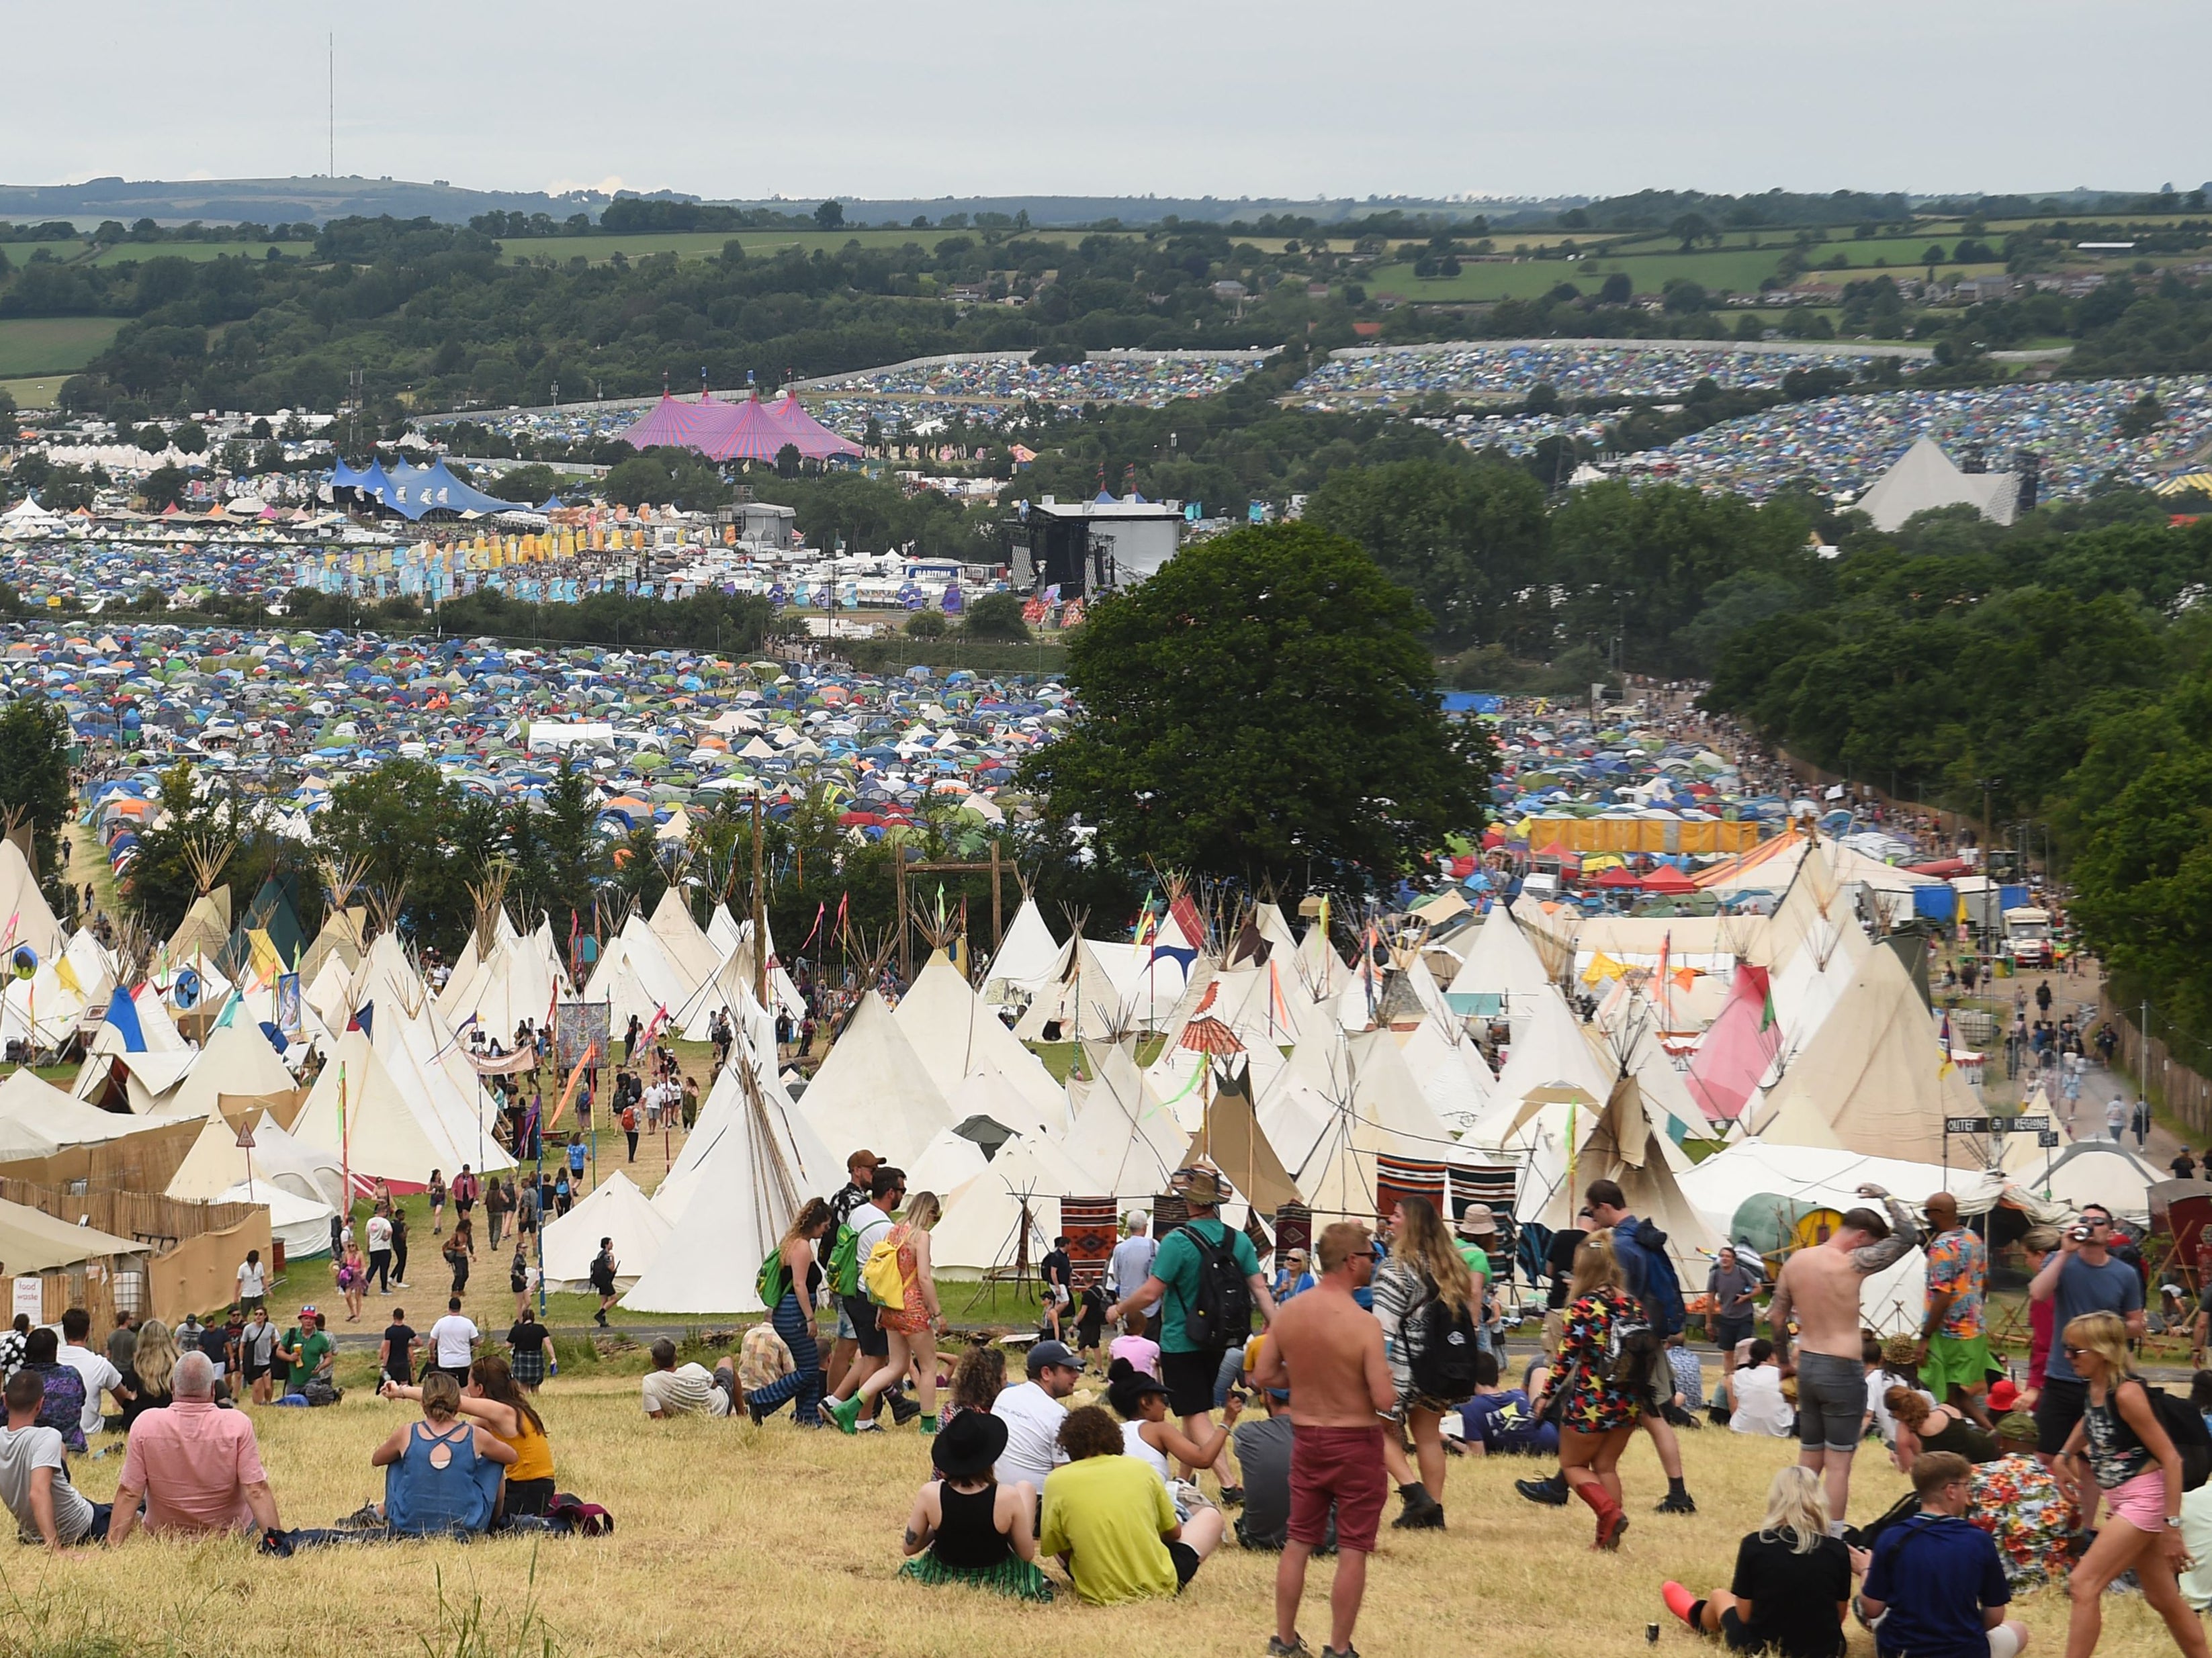 Glastonbury 2023 tickets were being sold despite there reportedly being none left